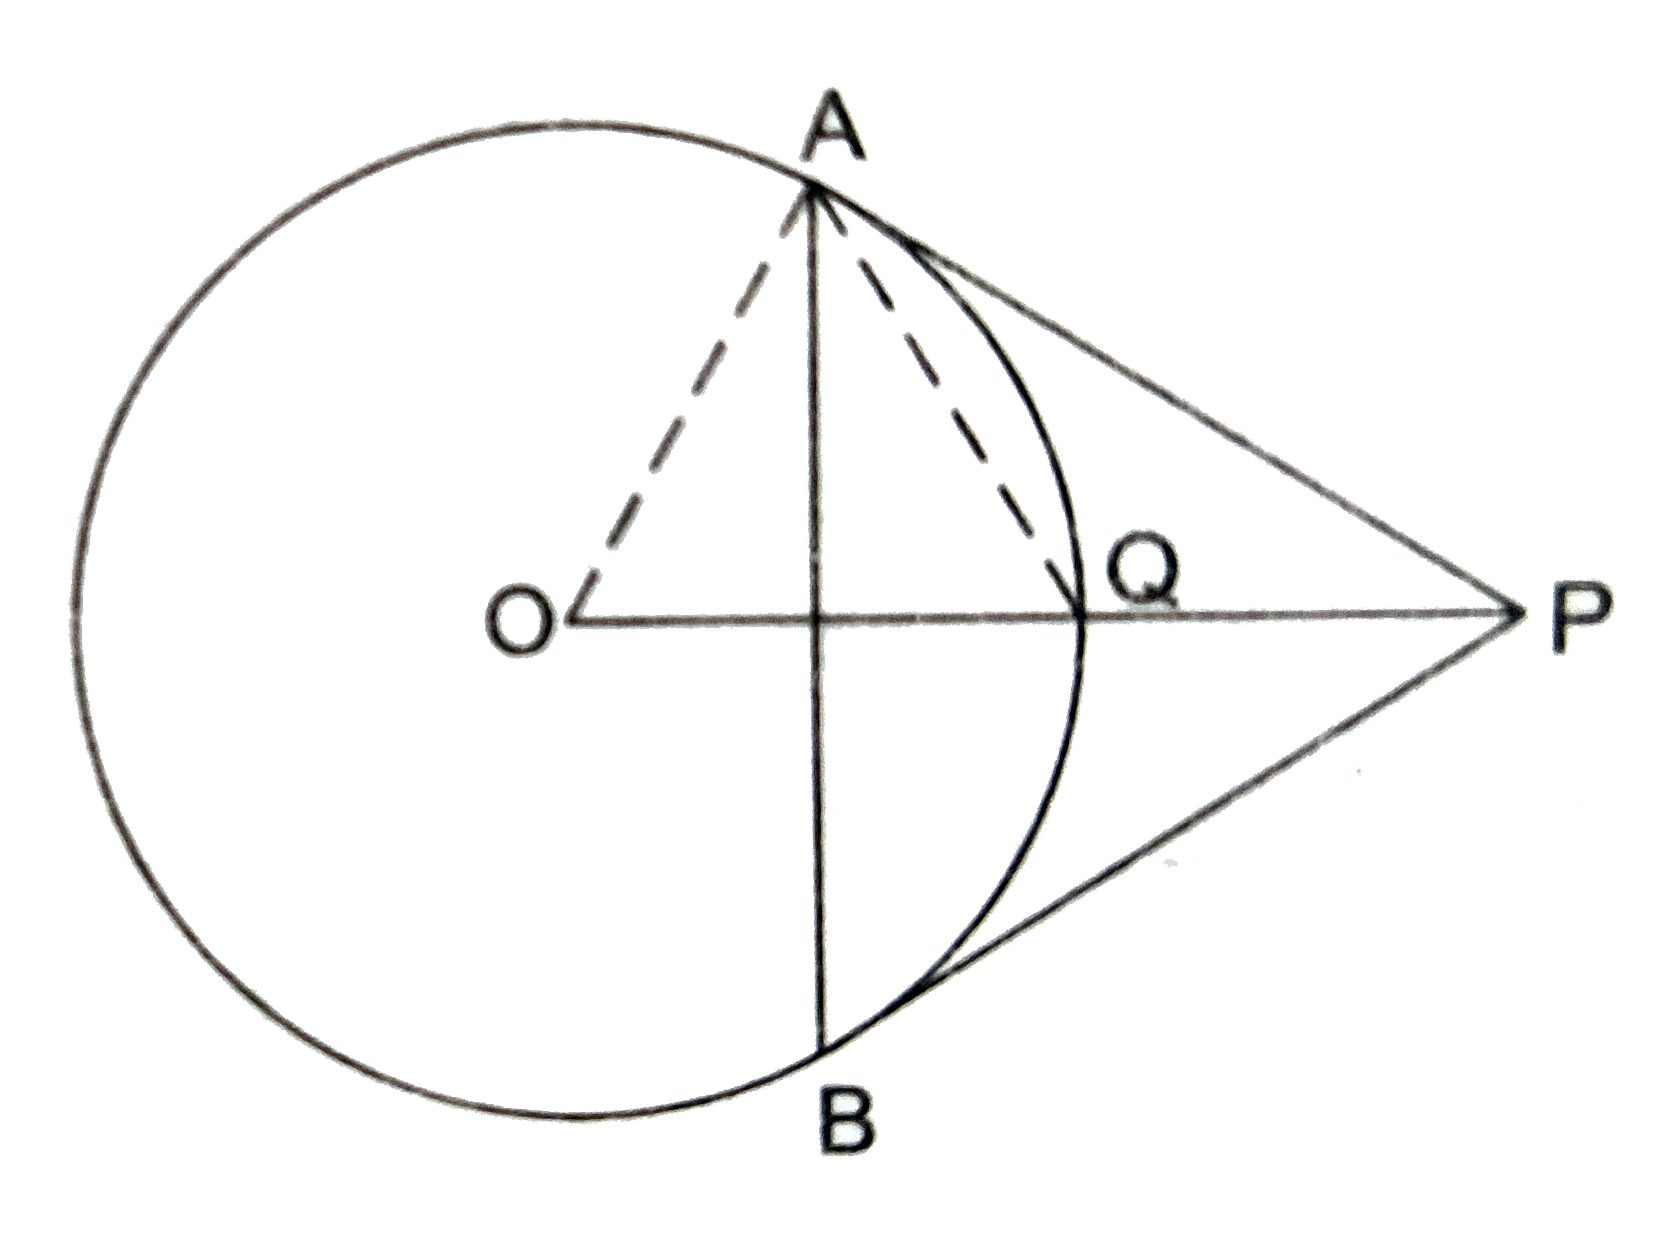 From a point P, two tangents PA and PB are drawn to a circle C(O,r). If OP=2r, show that DeltaAPB is equilateral.